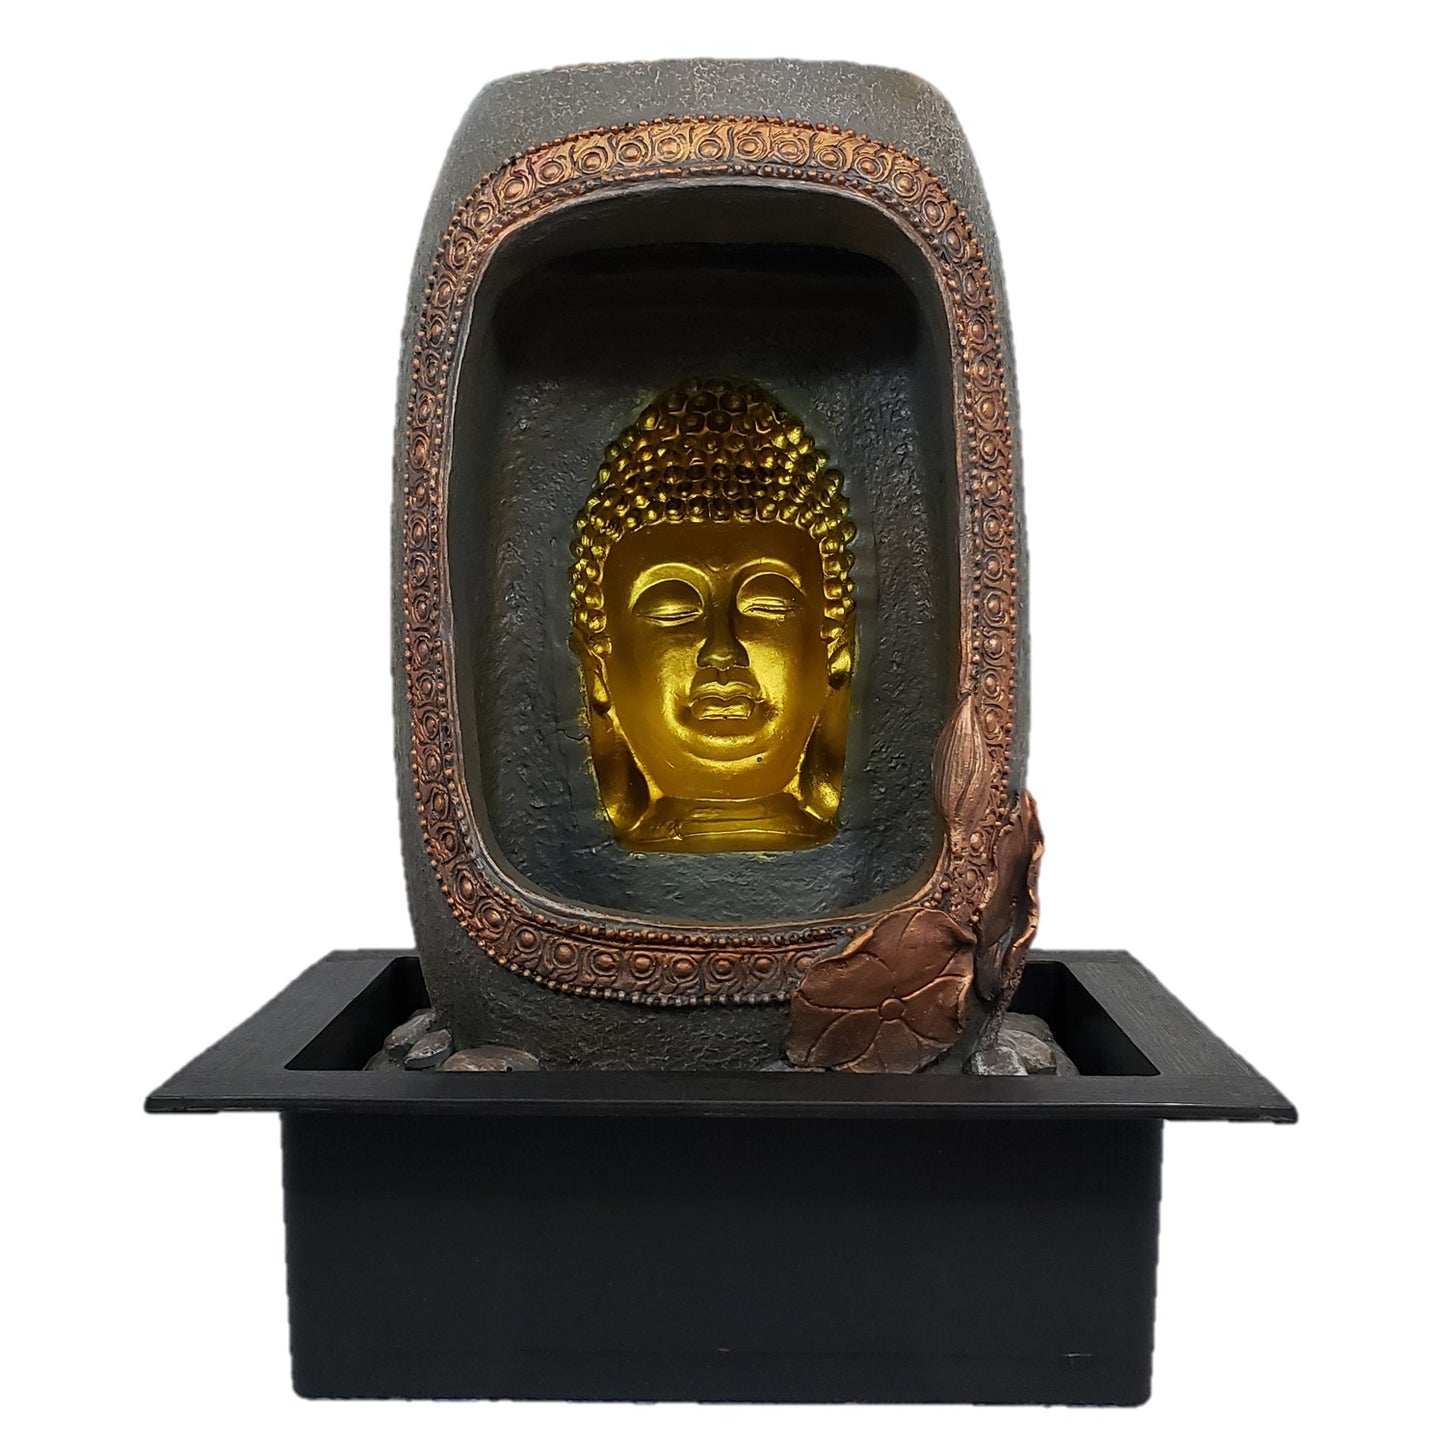 Fountain Buddha Face Tabletop Cascading Led Relaxing Waterfall Indoor Outdoor